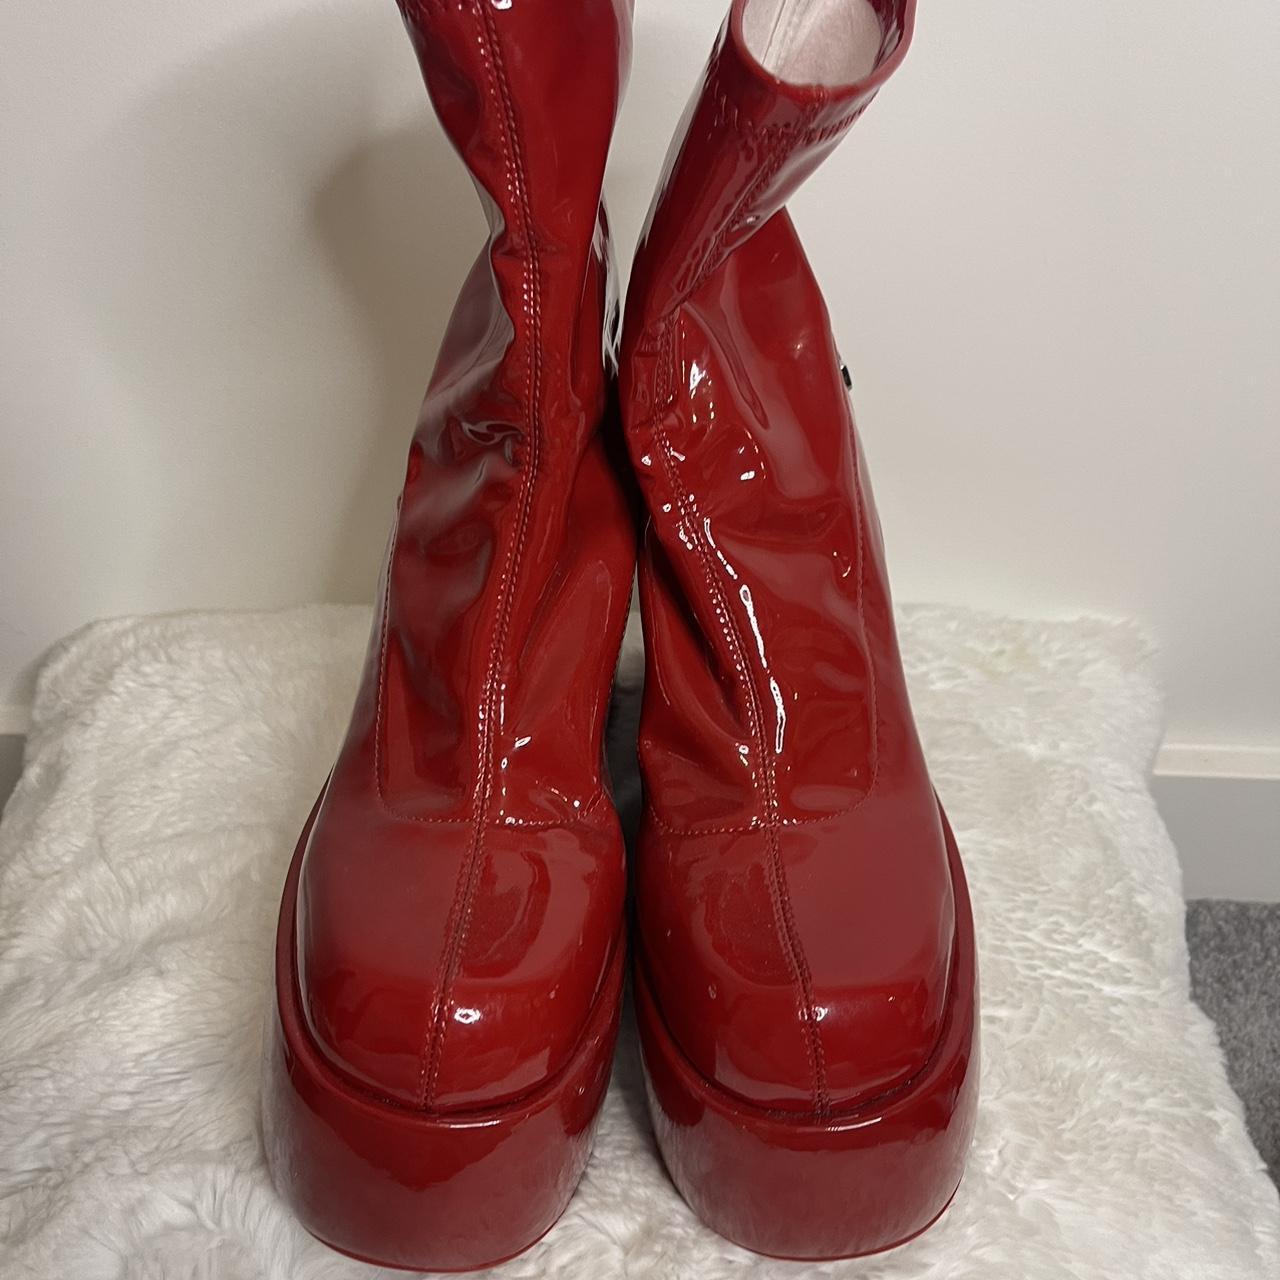 Naked Wolfe Red Boots Size Worn Once Nakedwolfe Depop